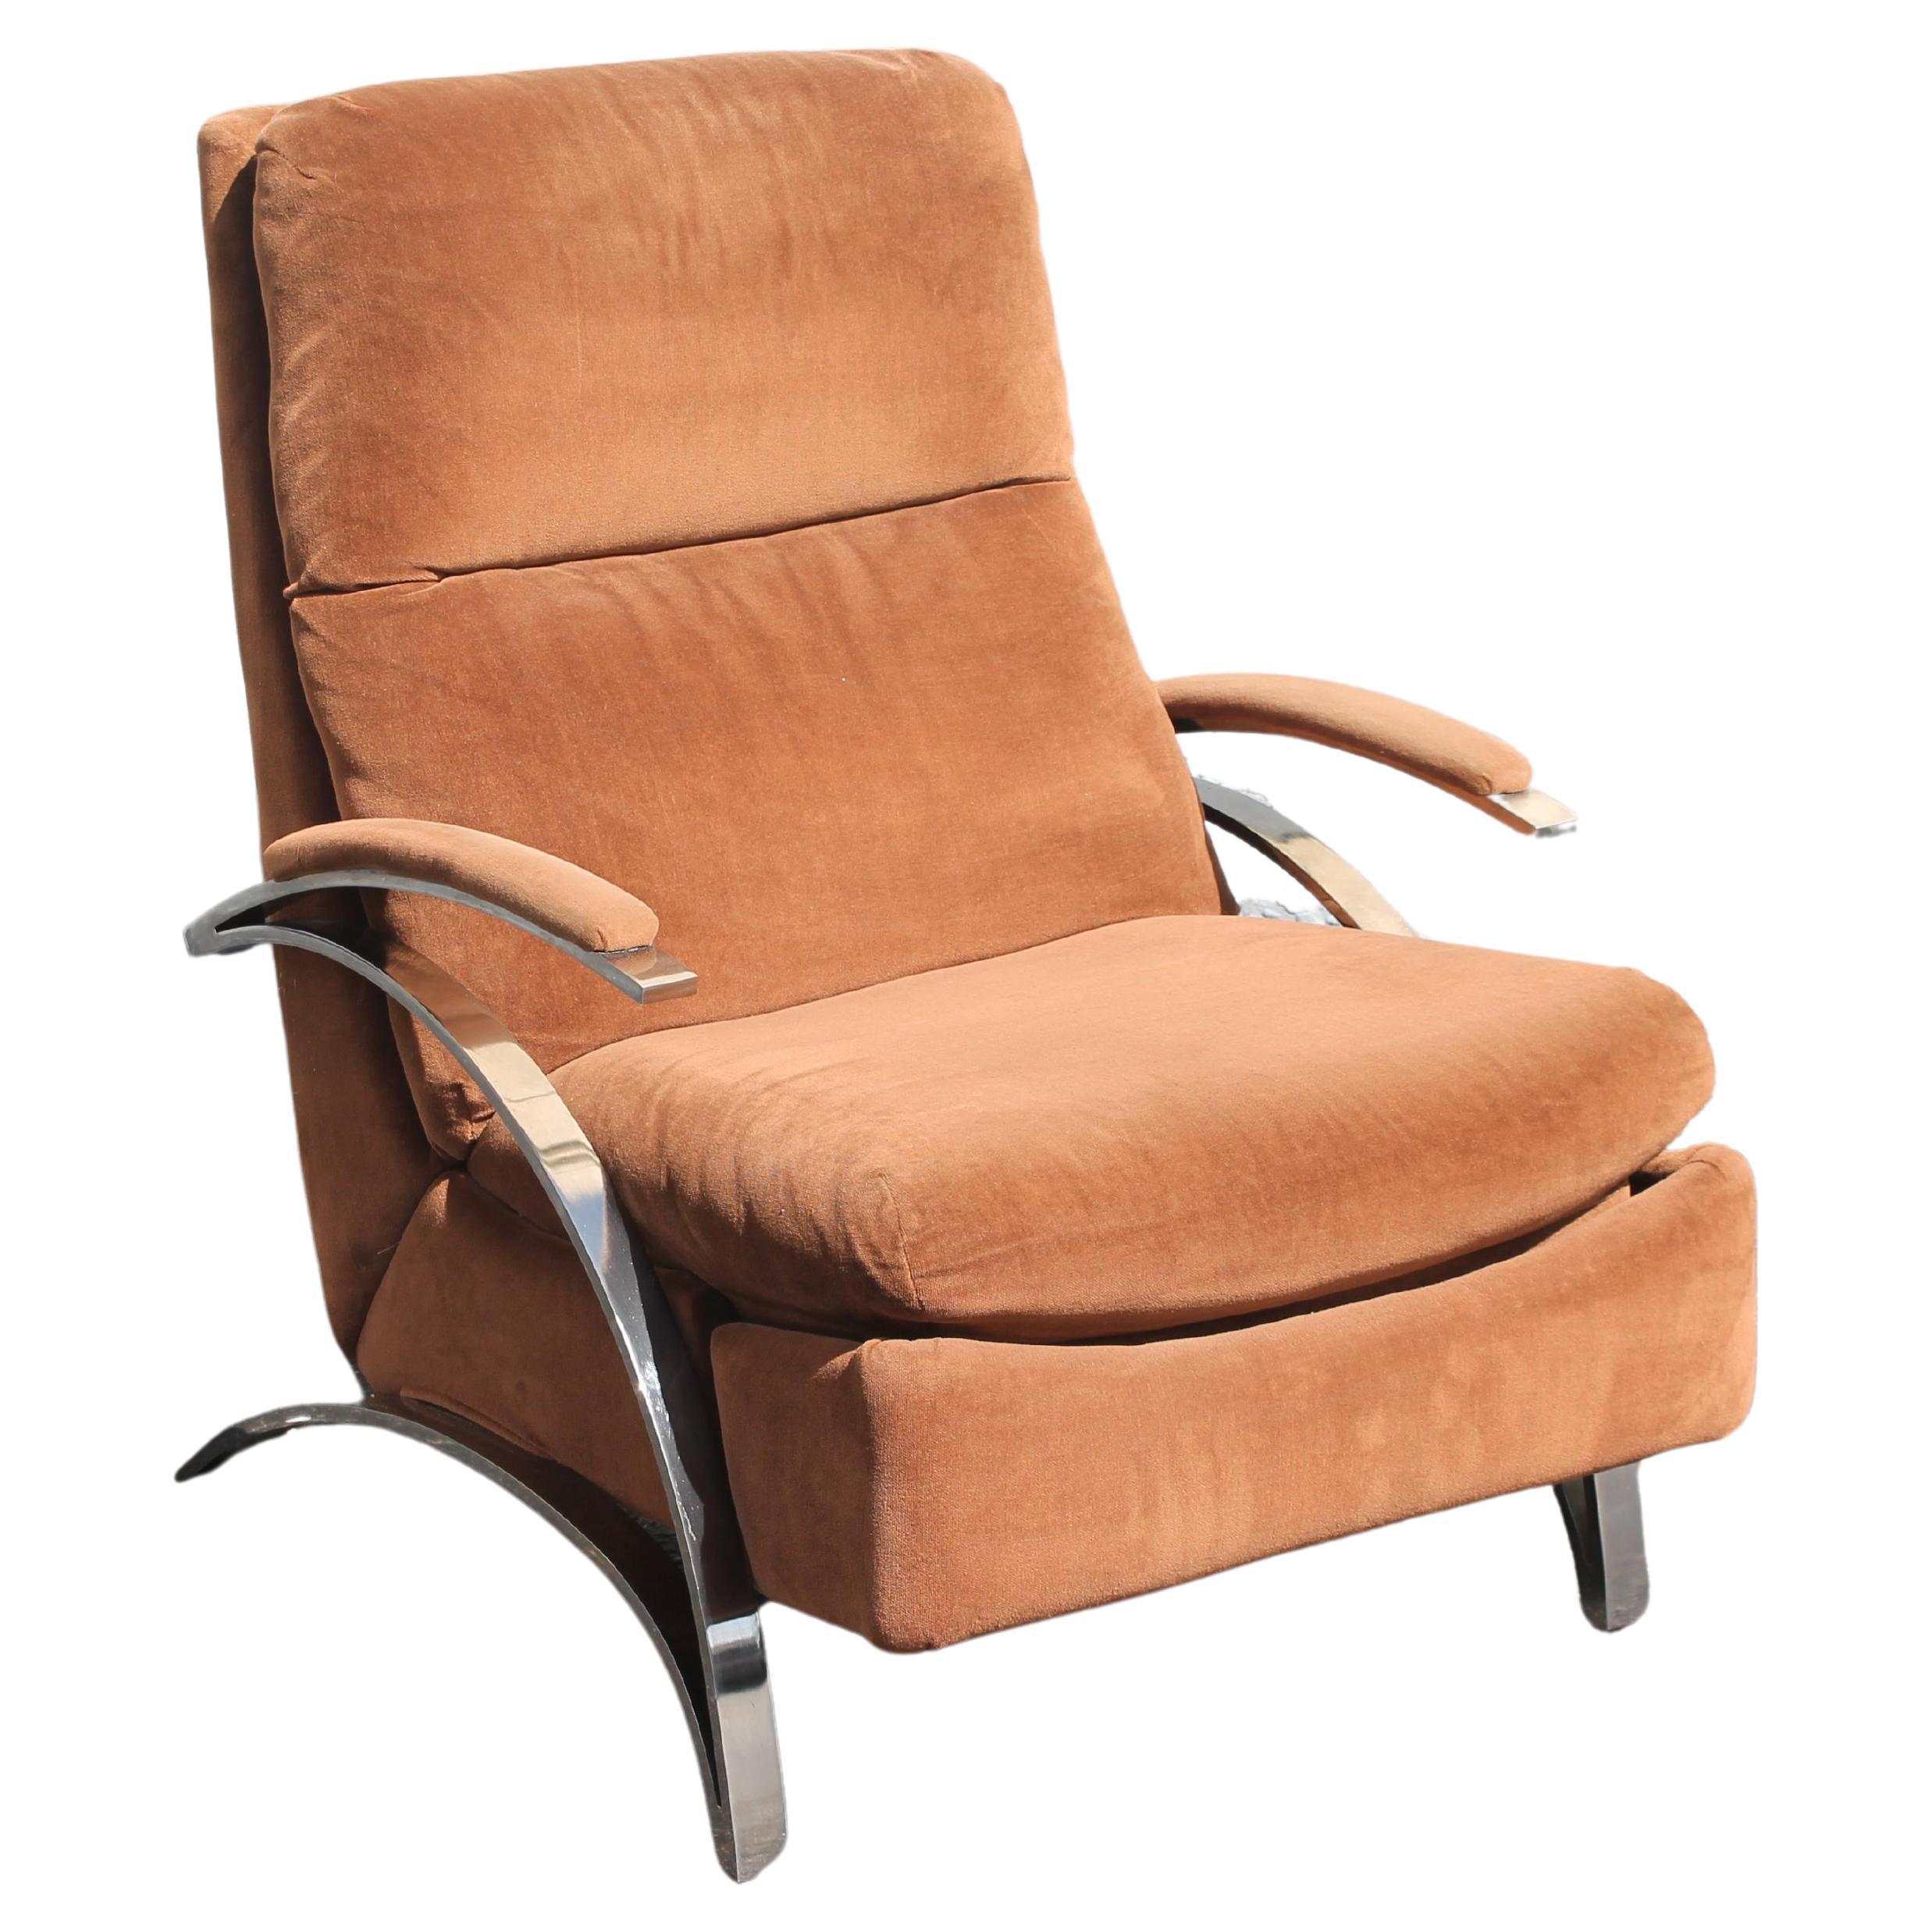 1070's Vintage Plush Brown with Chrome Recliner/ Barcalounger Chair For Sale